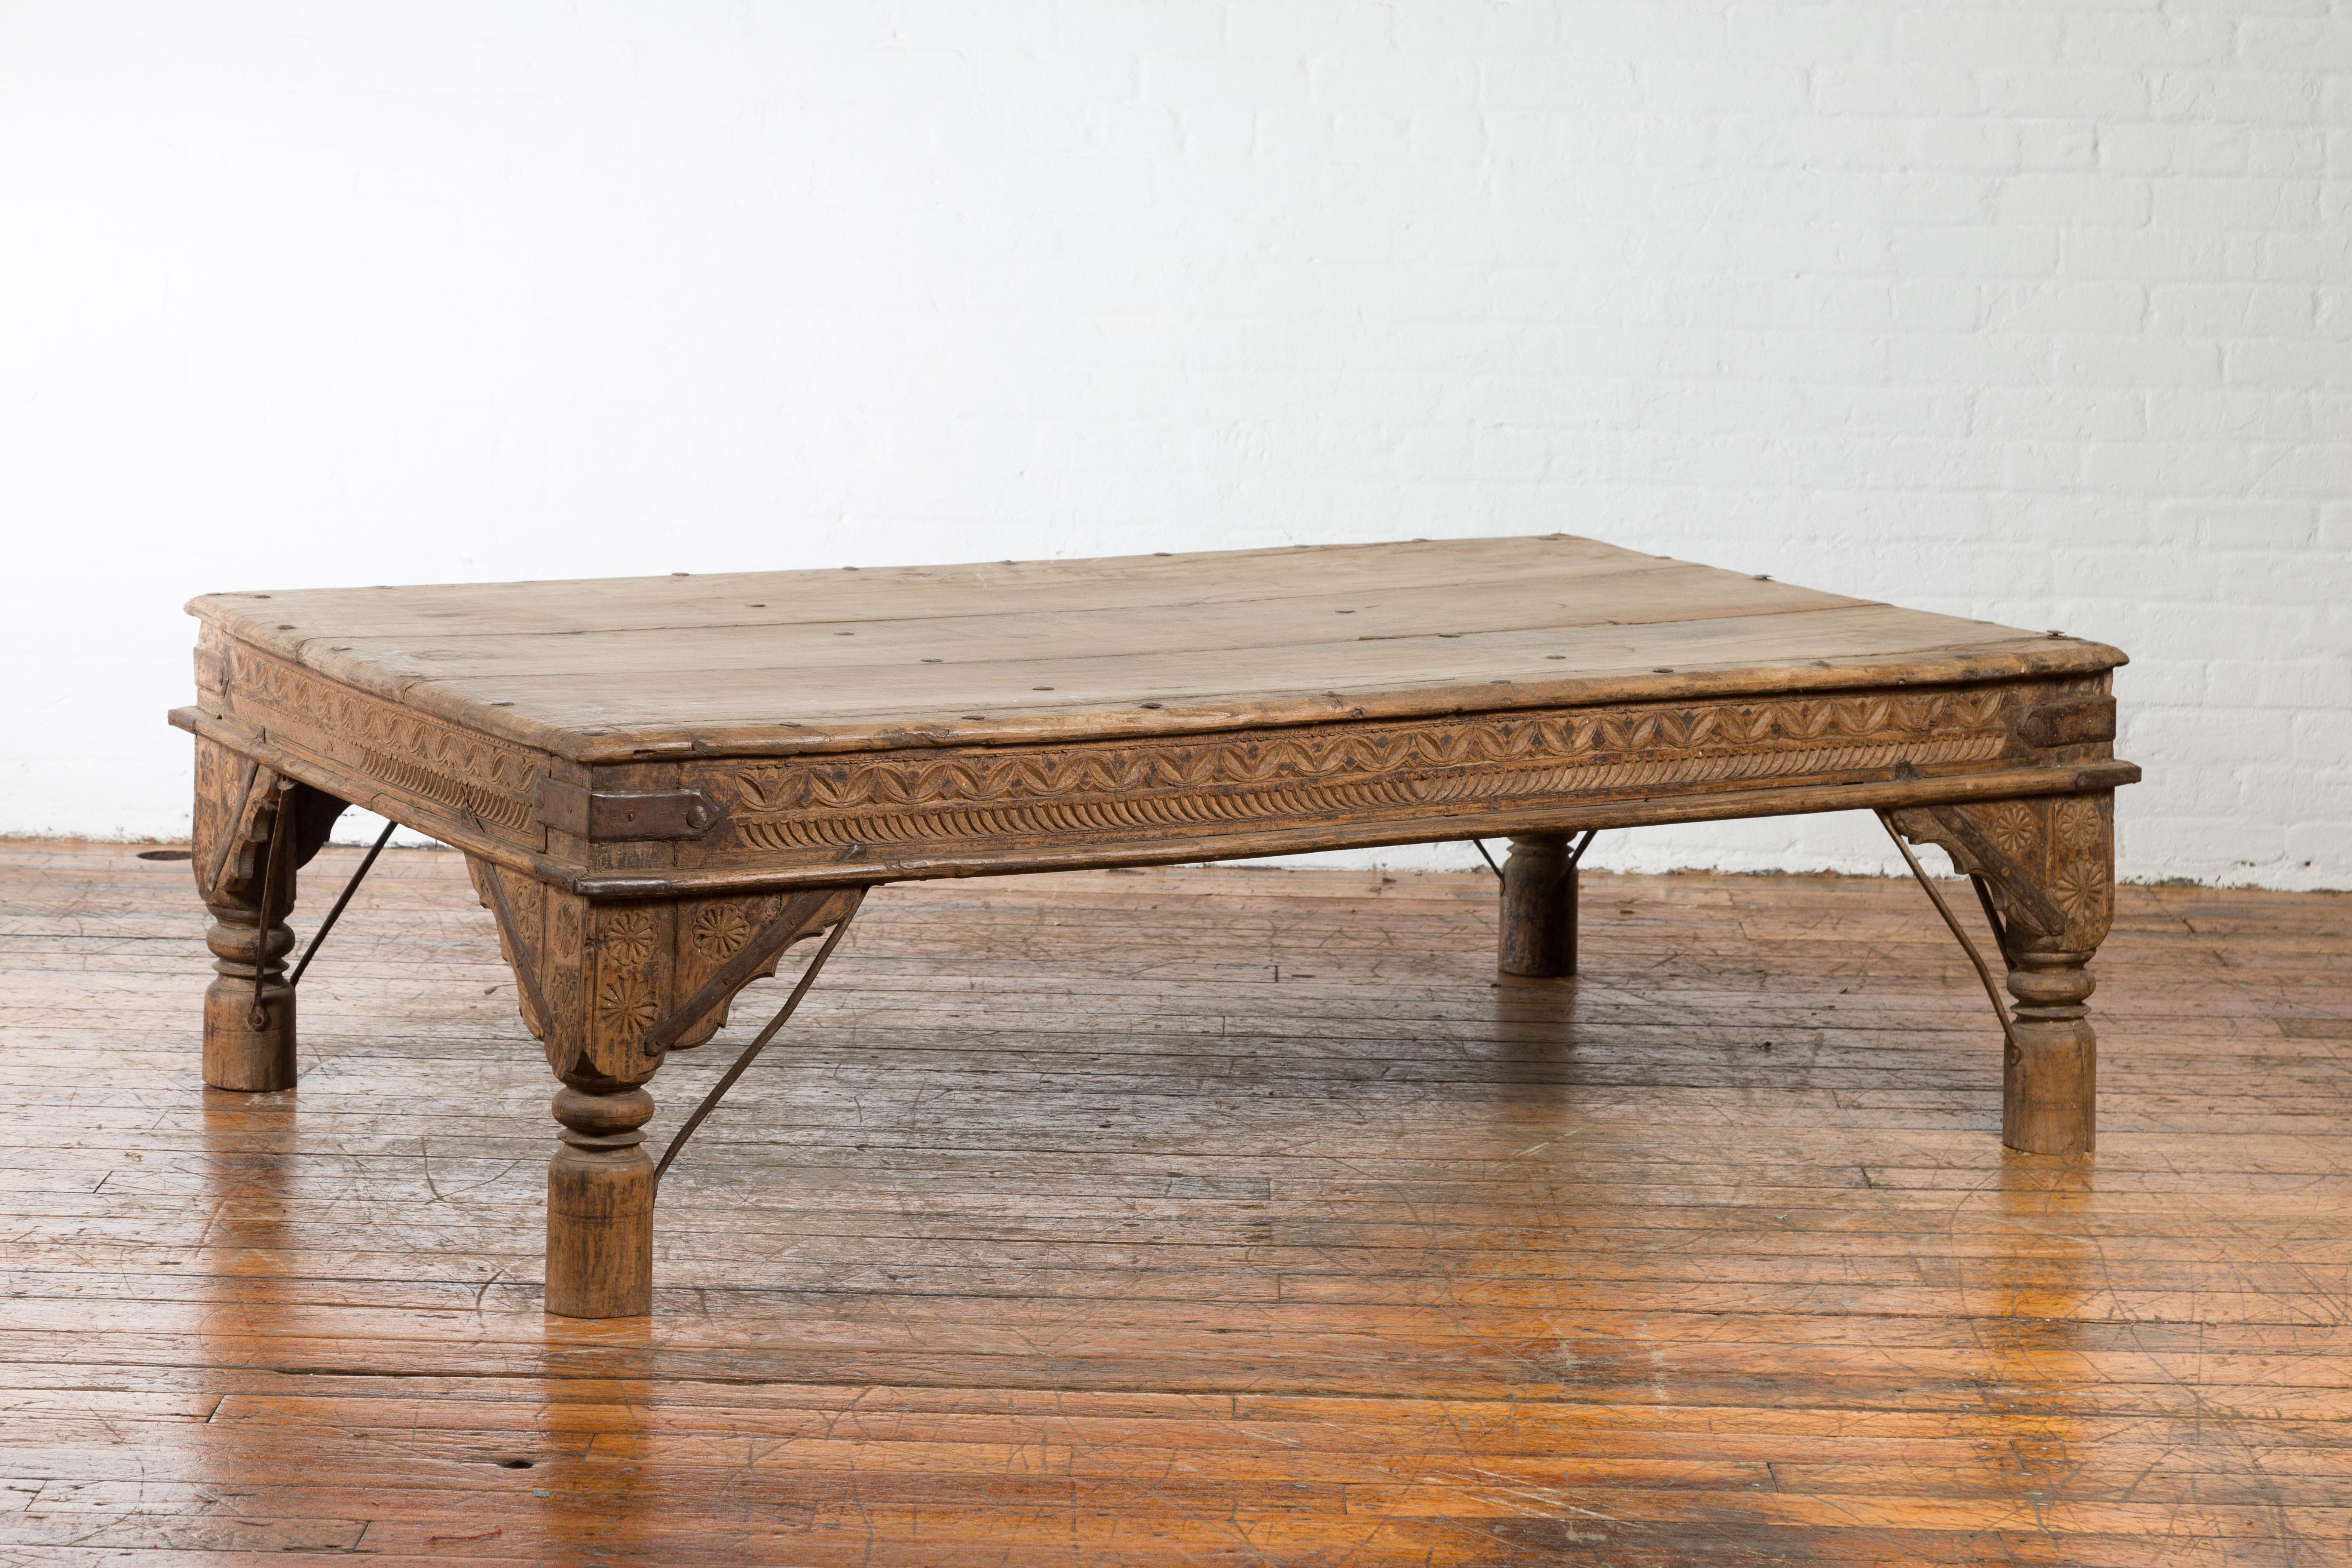 Indian Oversized Antique Temple Door with Studs Made into a Carved Coffee Table